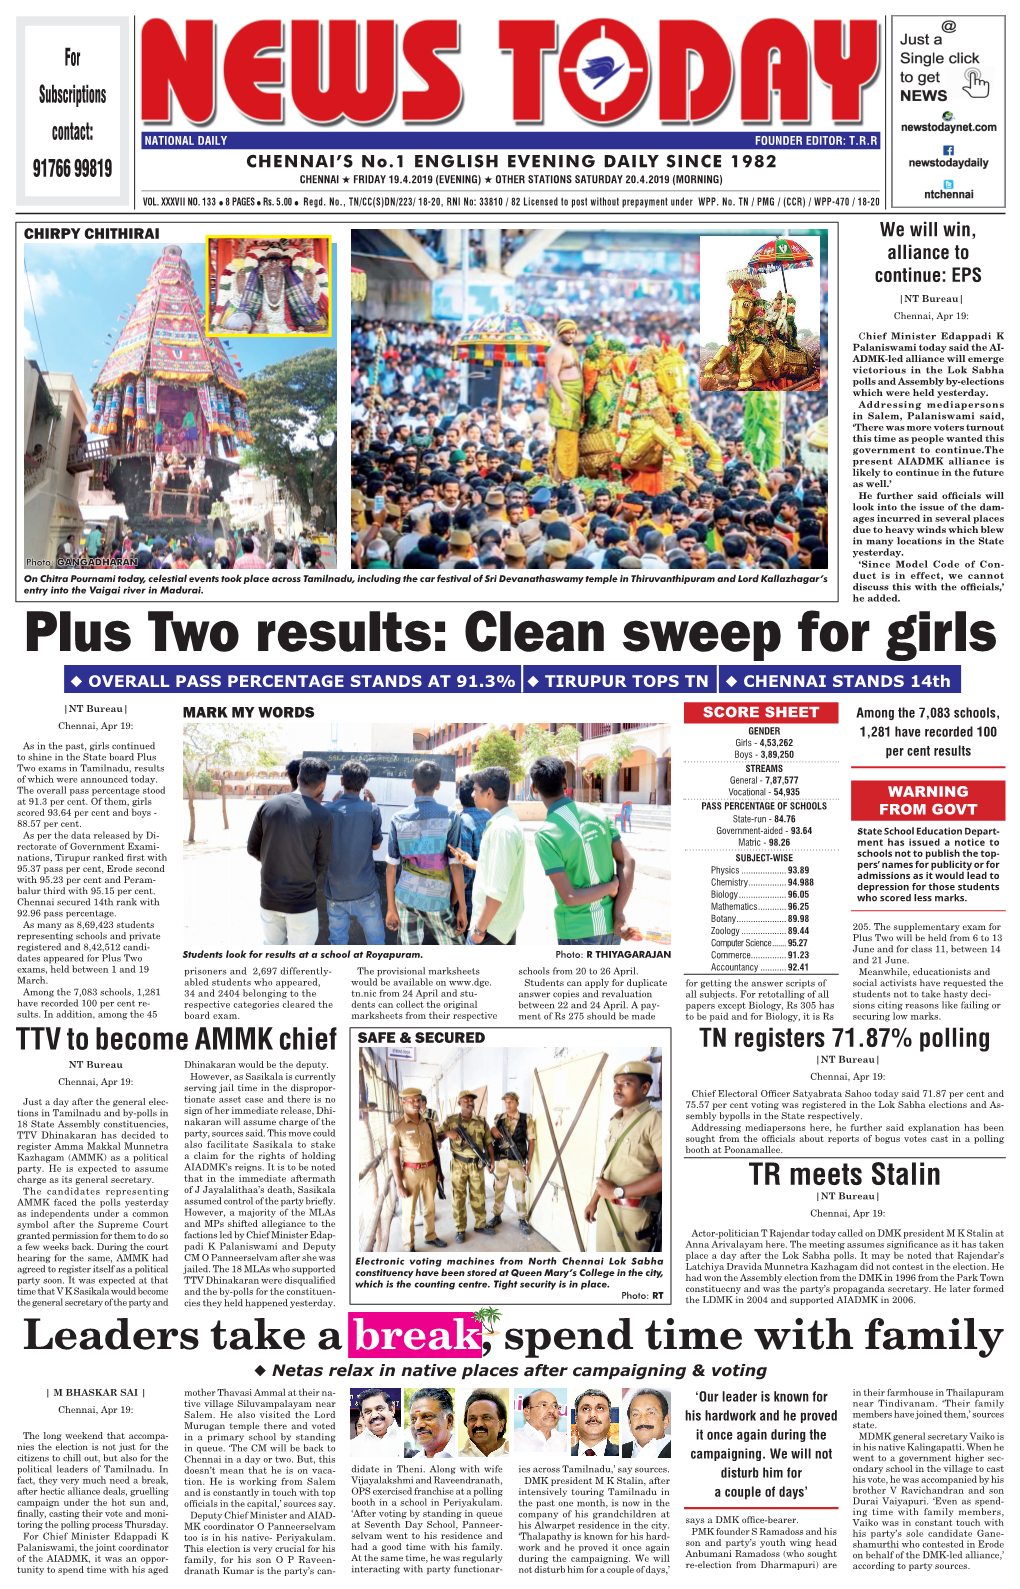 Clean Sweep for Girls U OVERALL PASS PERCENTAGE STANDS at 91.3% U TIRUPUR TOPS TN U CHENNAI STANDS 14Th